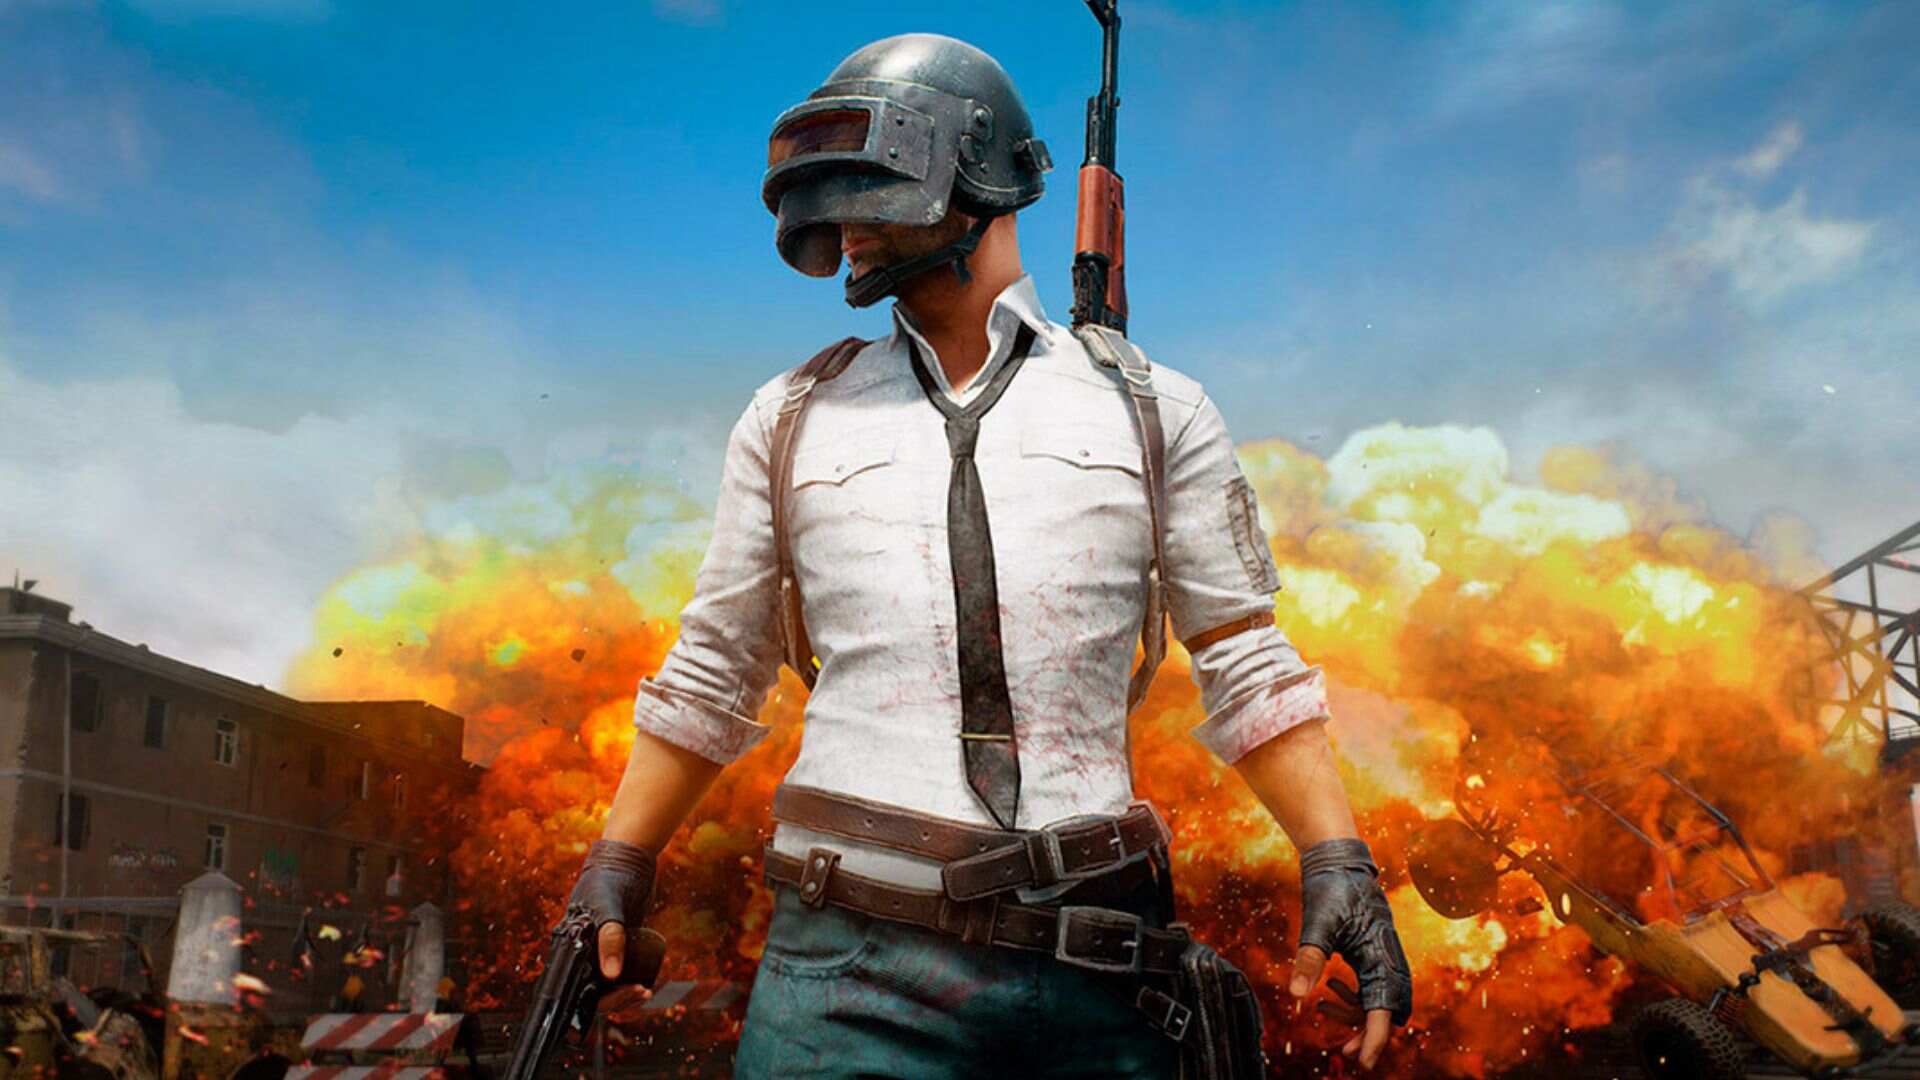 Download failed because you may not have purchased this app pubg mobile фото 11